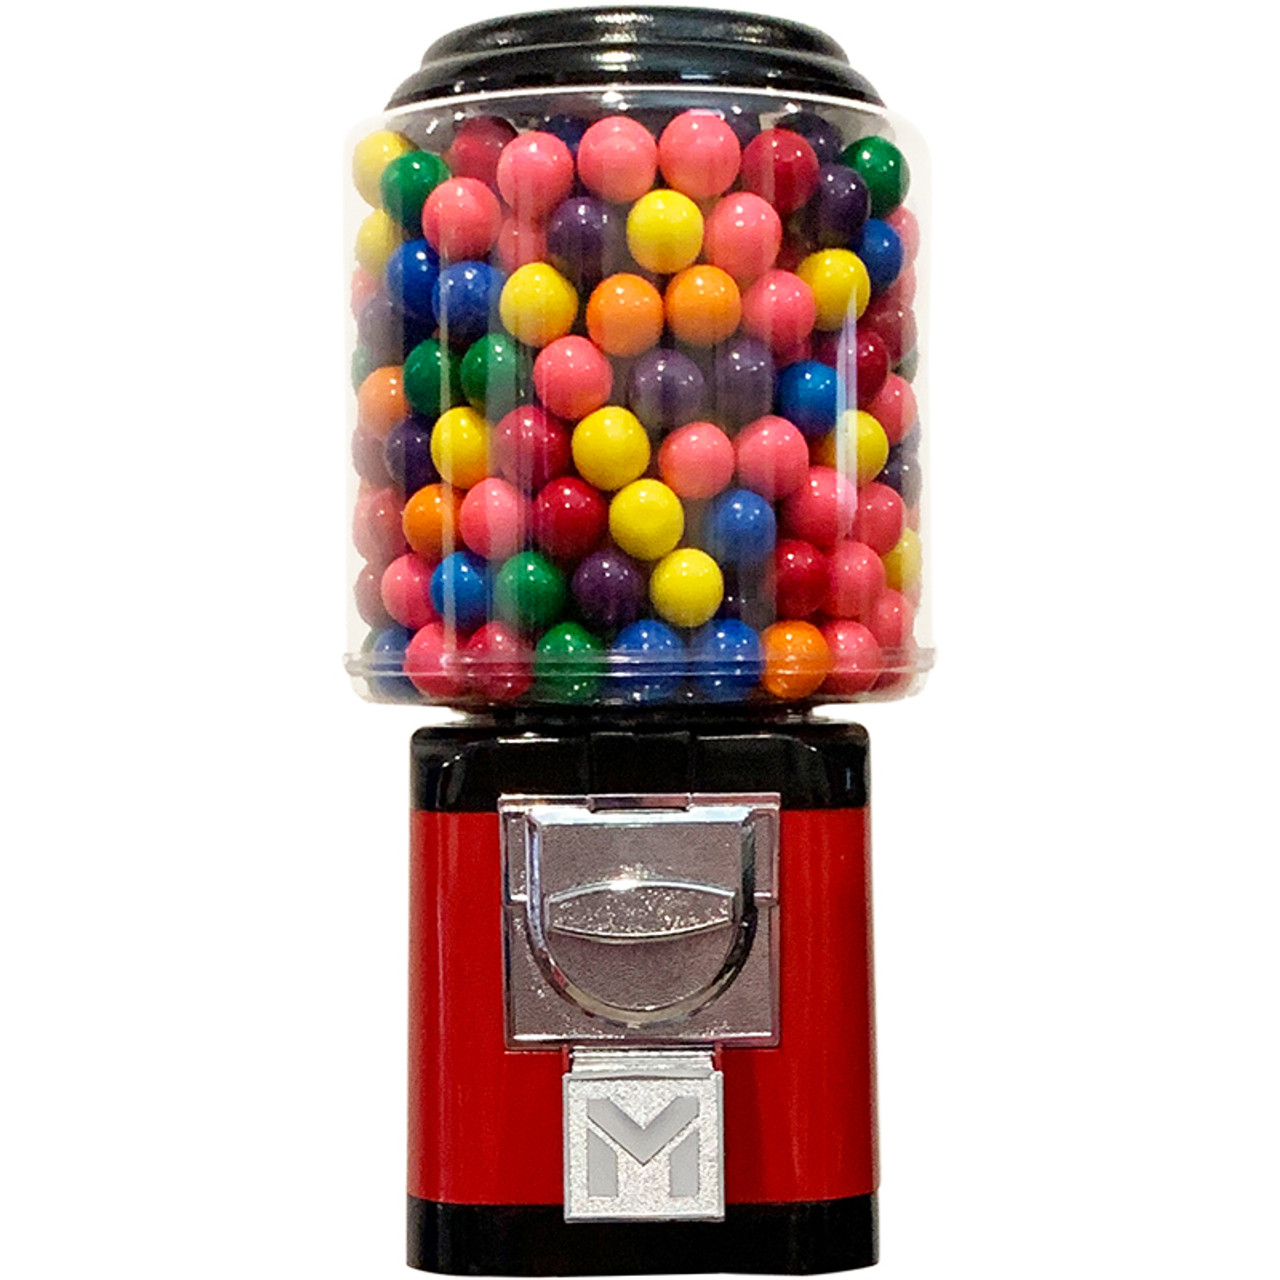 Beaver Double Head Gumball Candy Nut Bulk Vending Machine Complete with Lock Key 